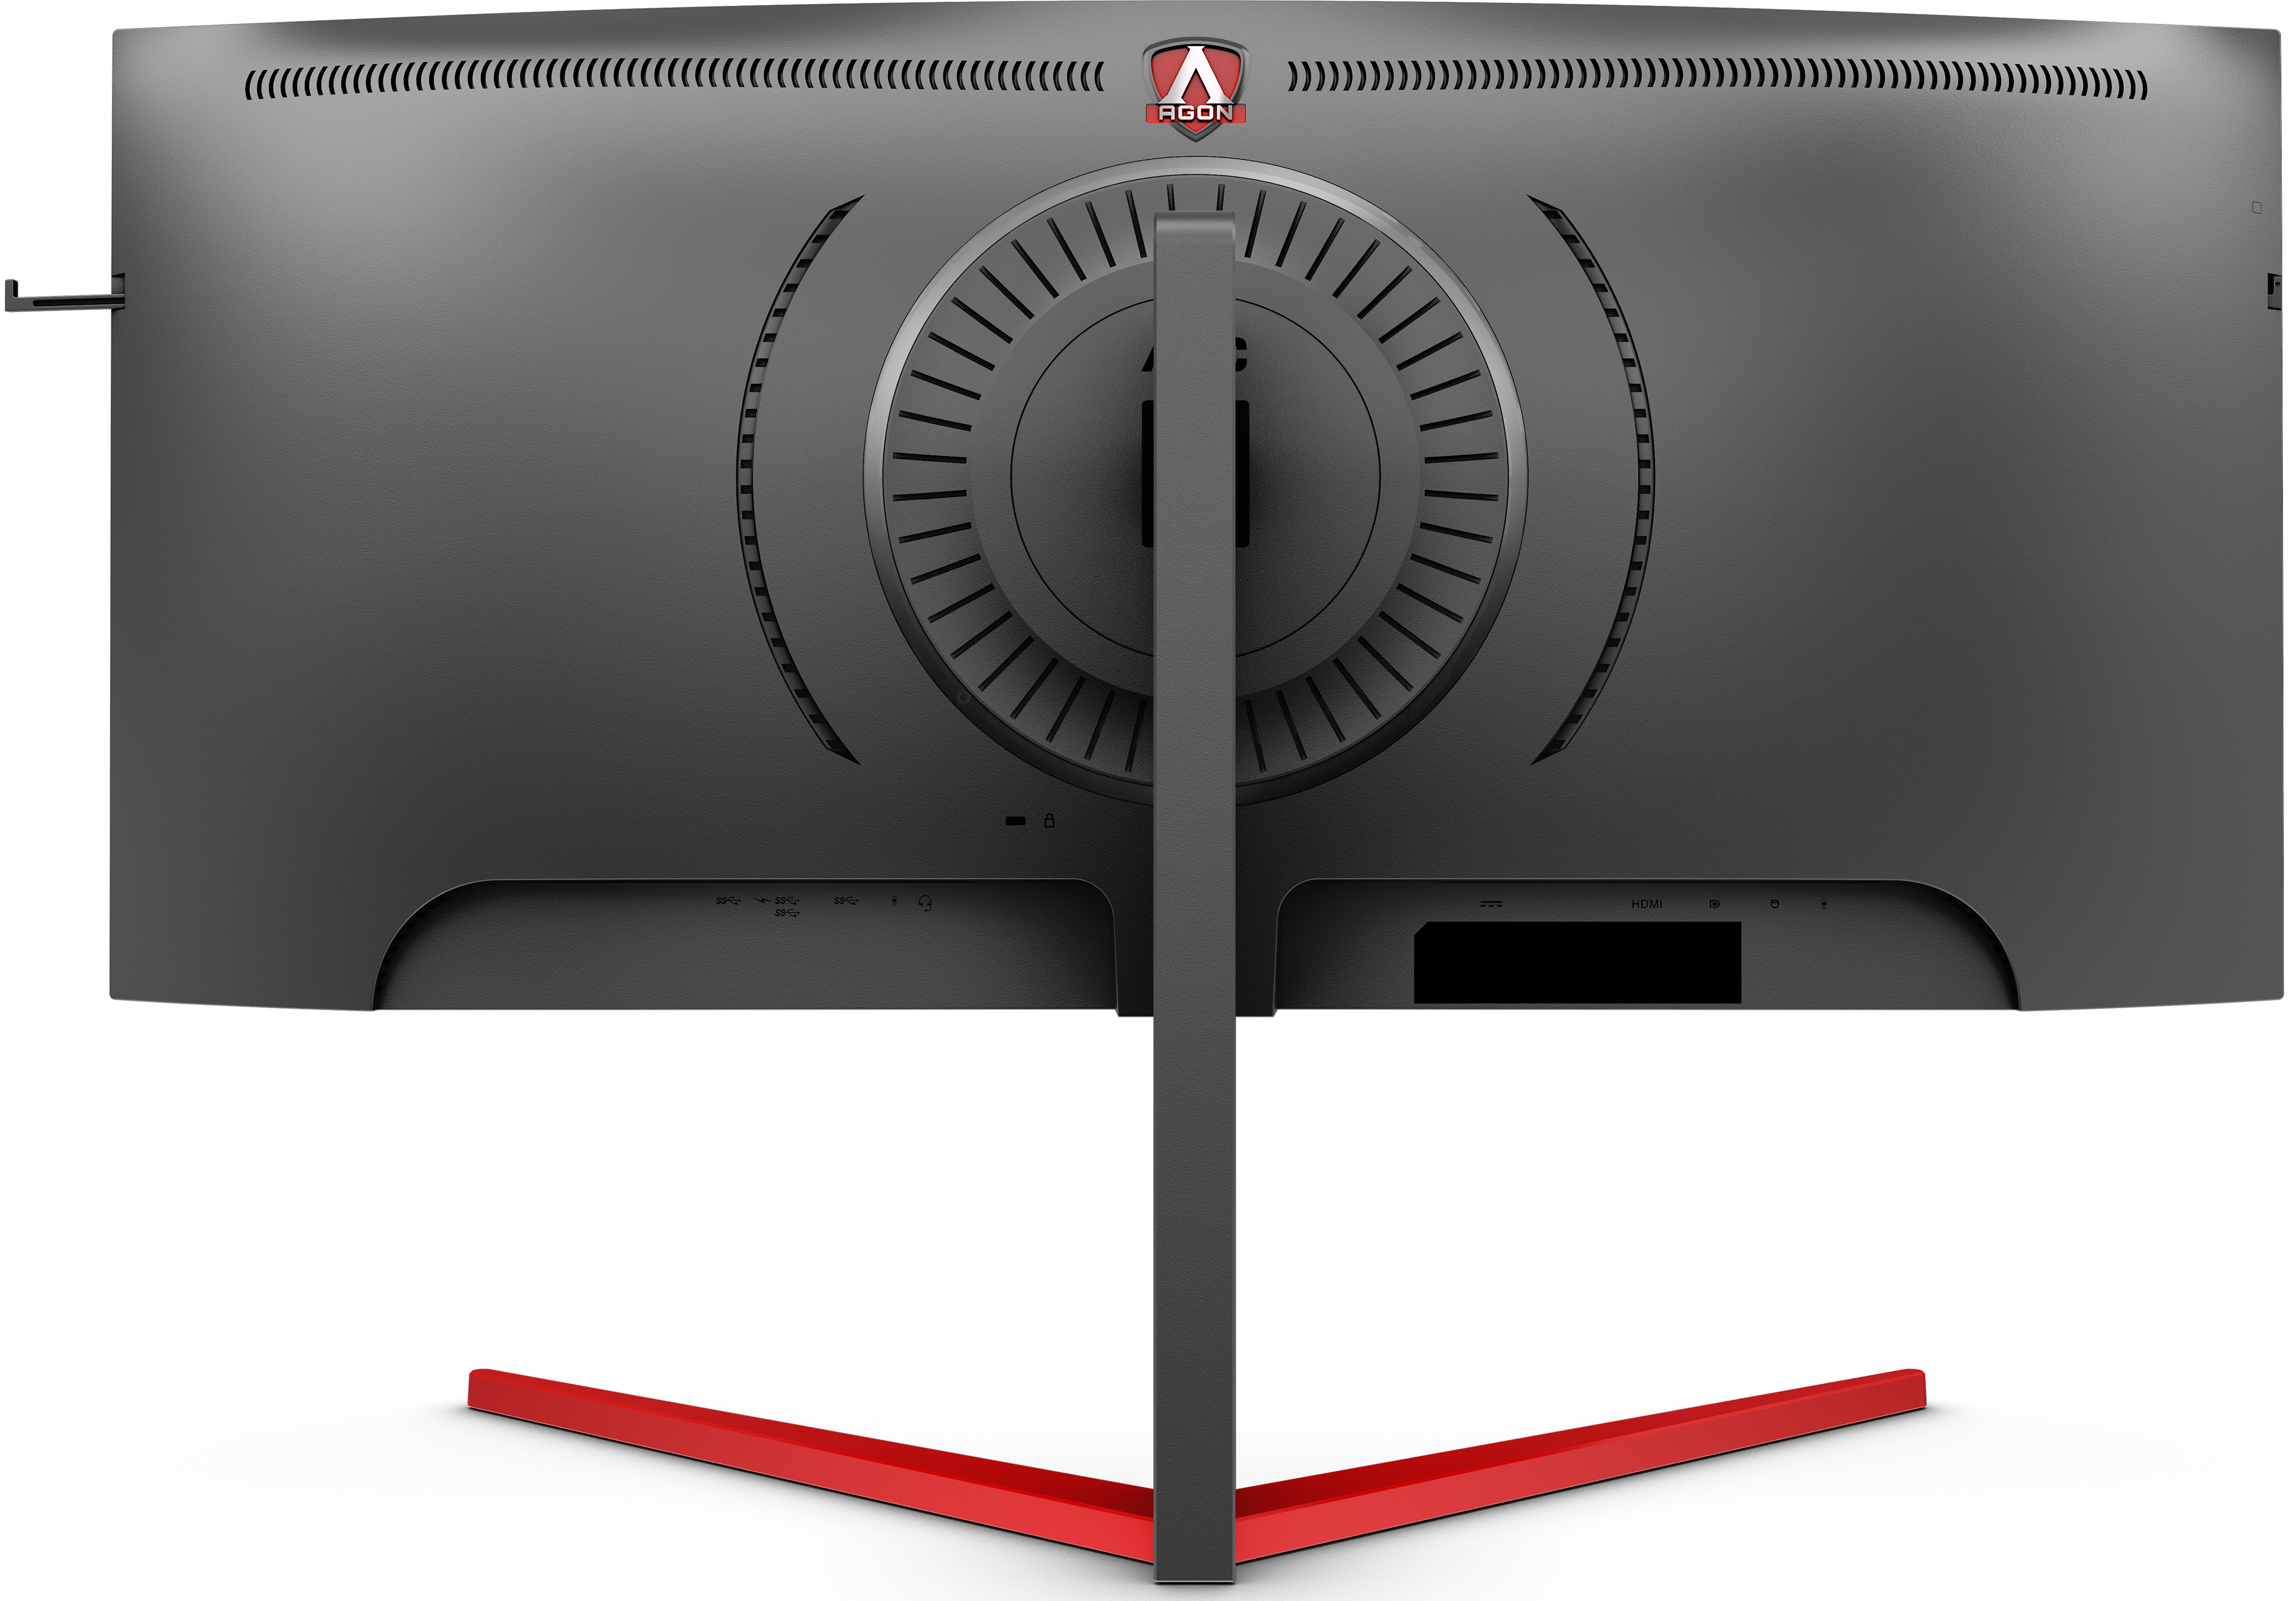 AOC Launches Their Flagship G-Sync Ultimate Gaming Monitor: The 